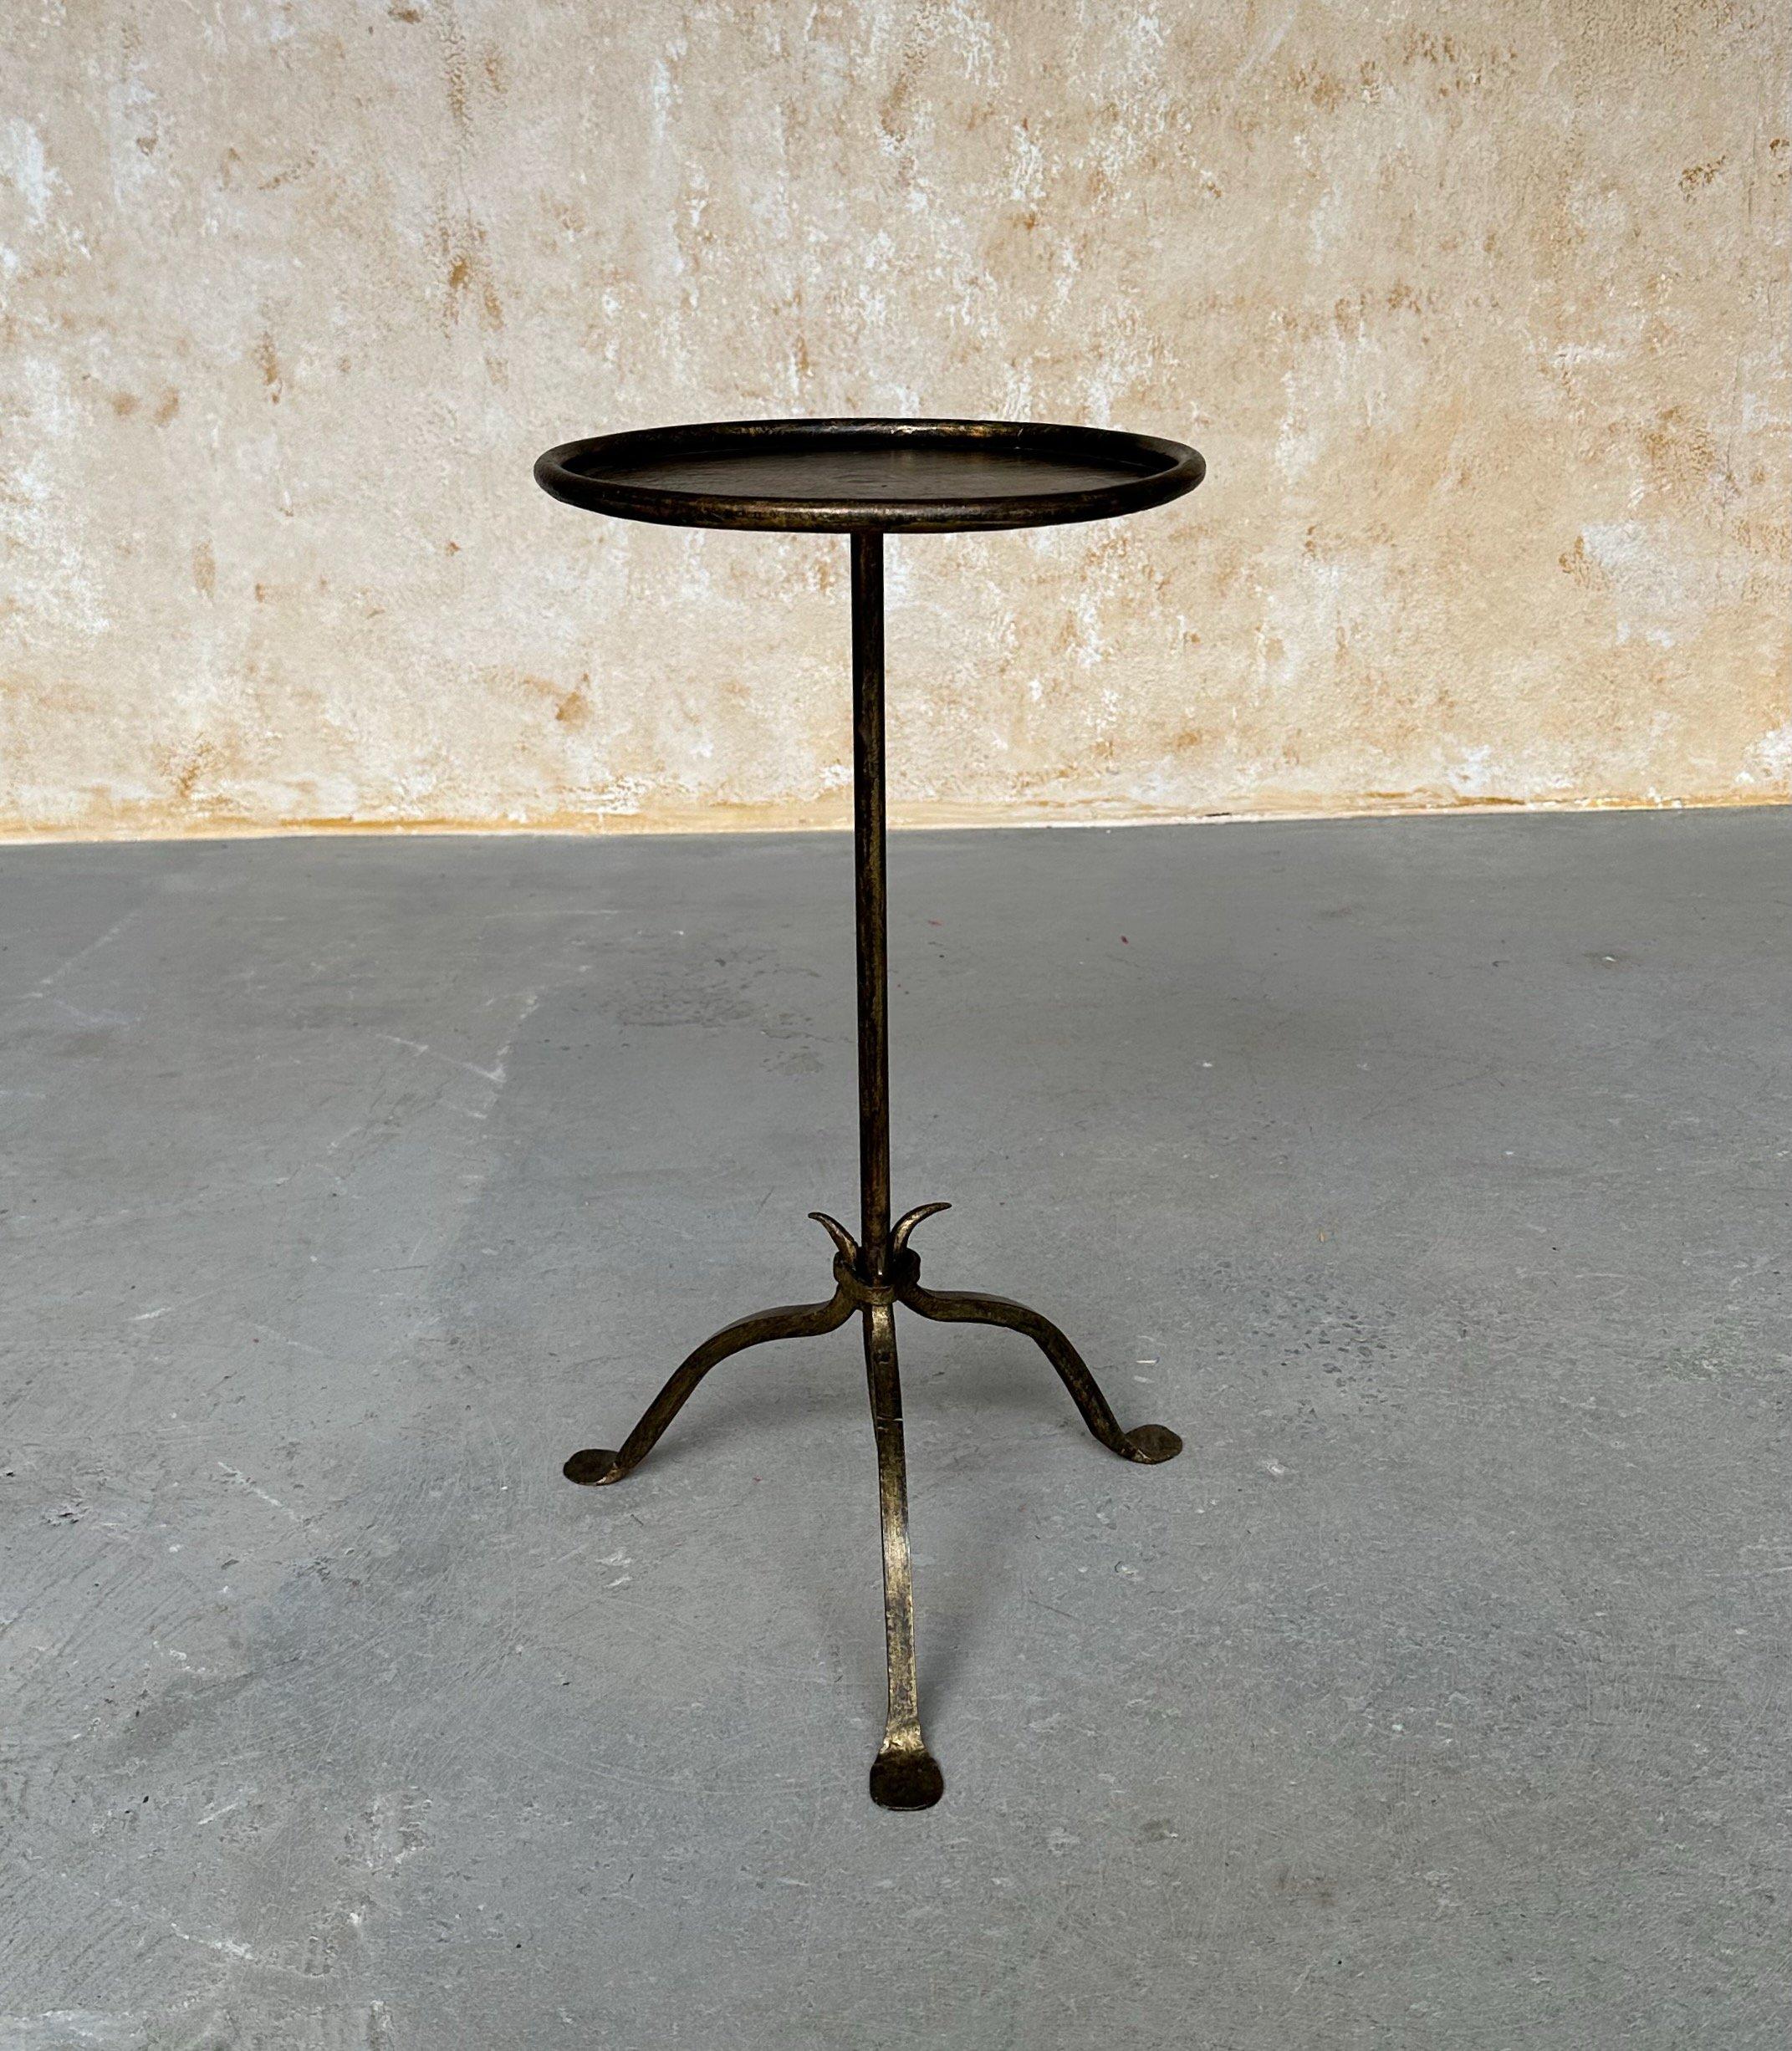 This lovely recently fabricated Spanish iron side table features a distinctive design with a central stem that tapers to a fine point, attached to a tripod base that comprises three subtly curved legs. The round top is encircled by a rolled frame,